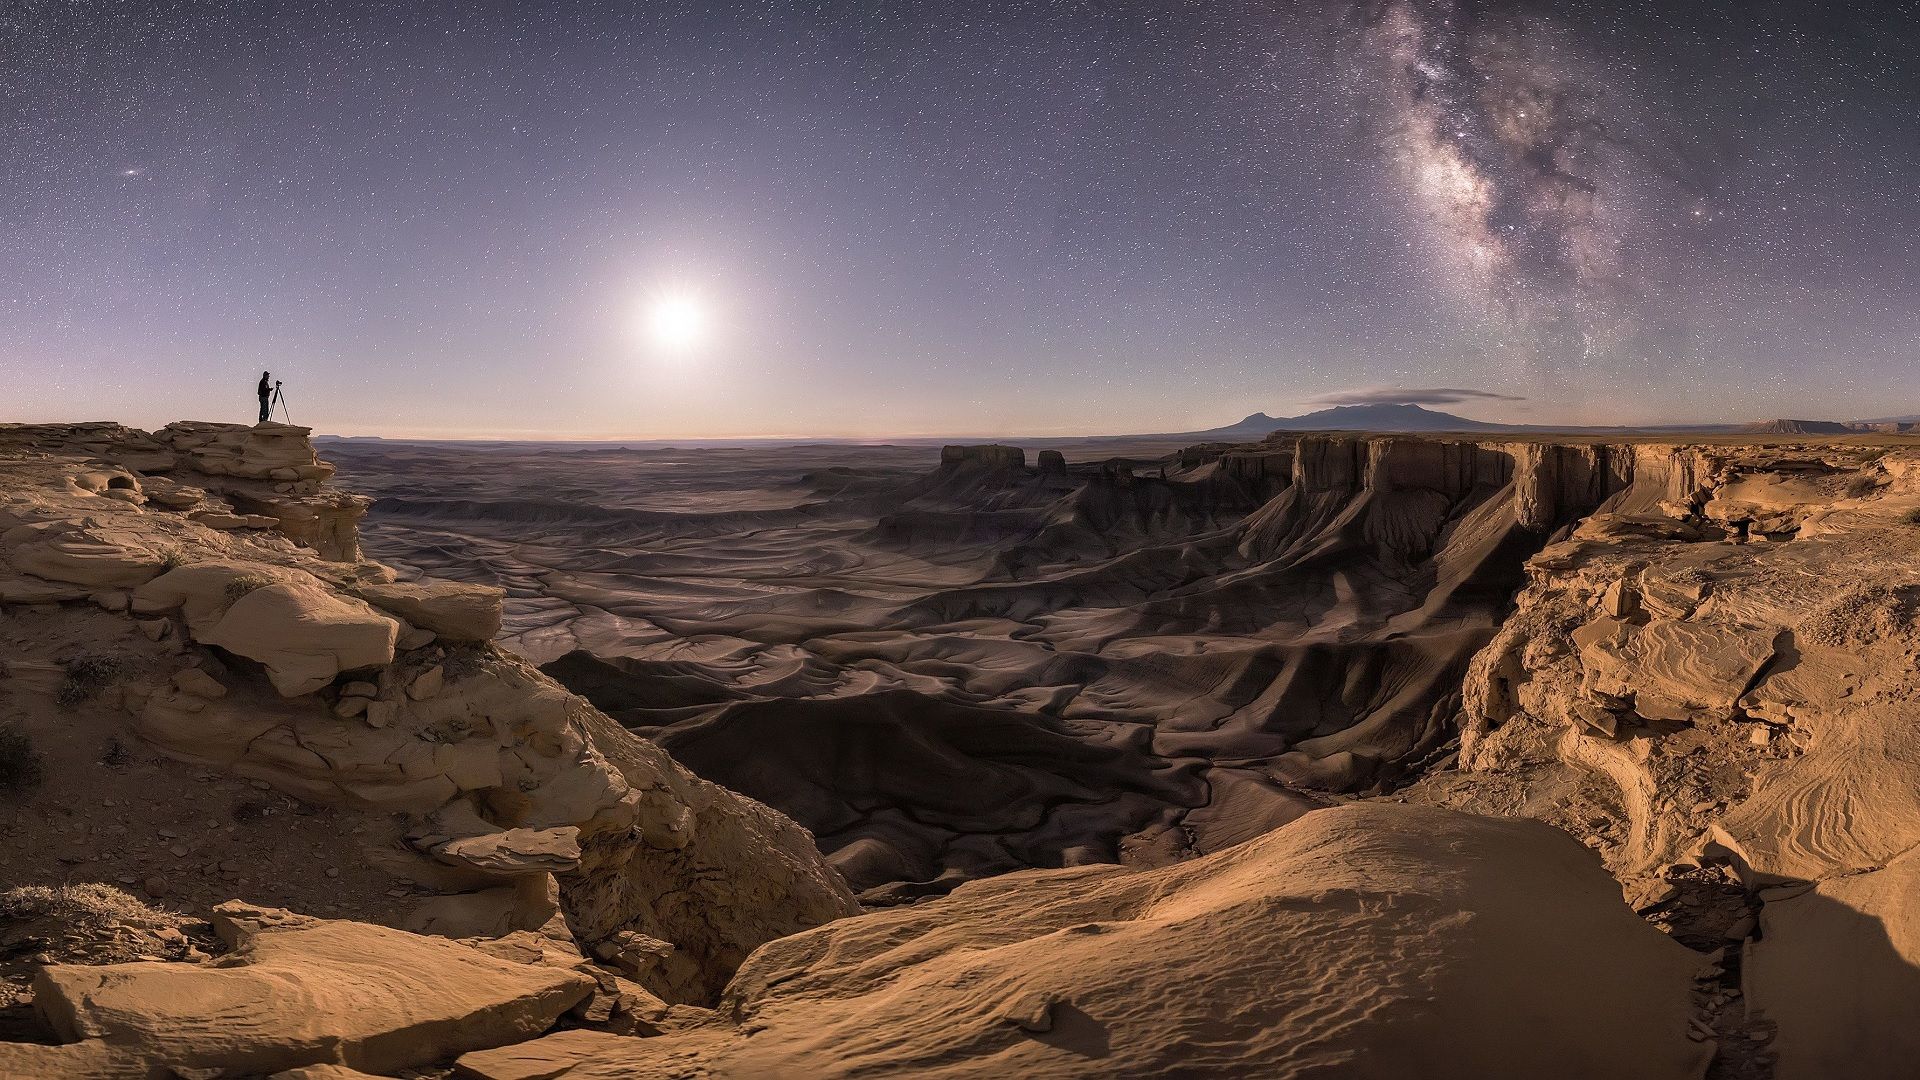 30 of the best astronomy photographs ever taken